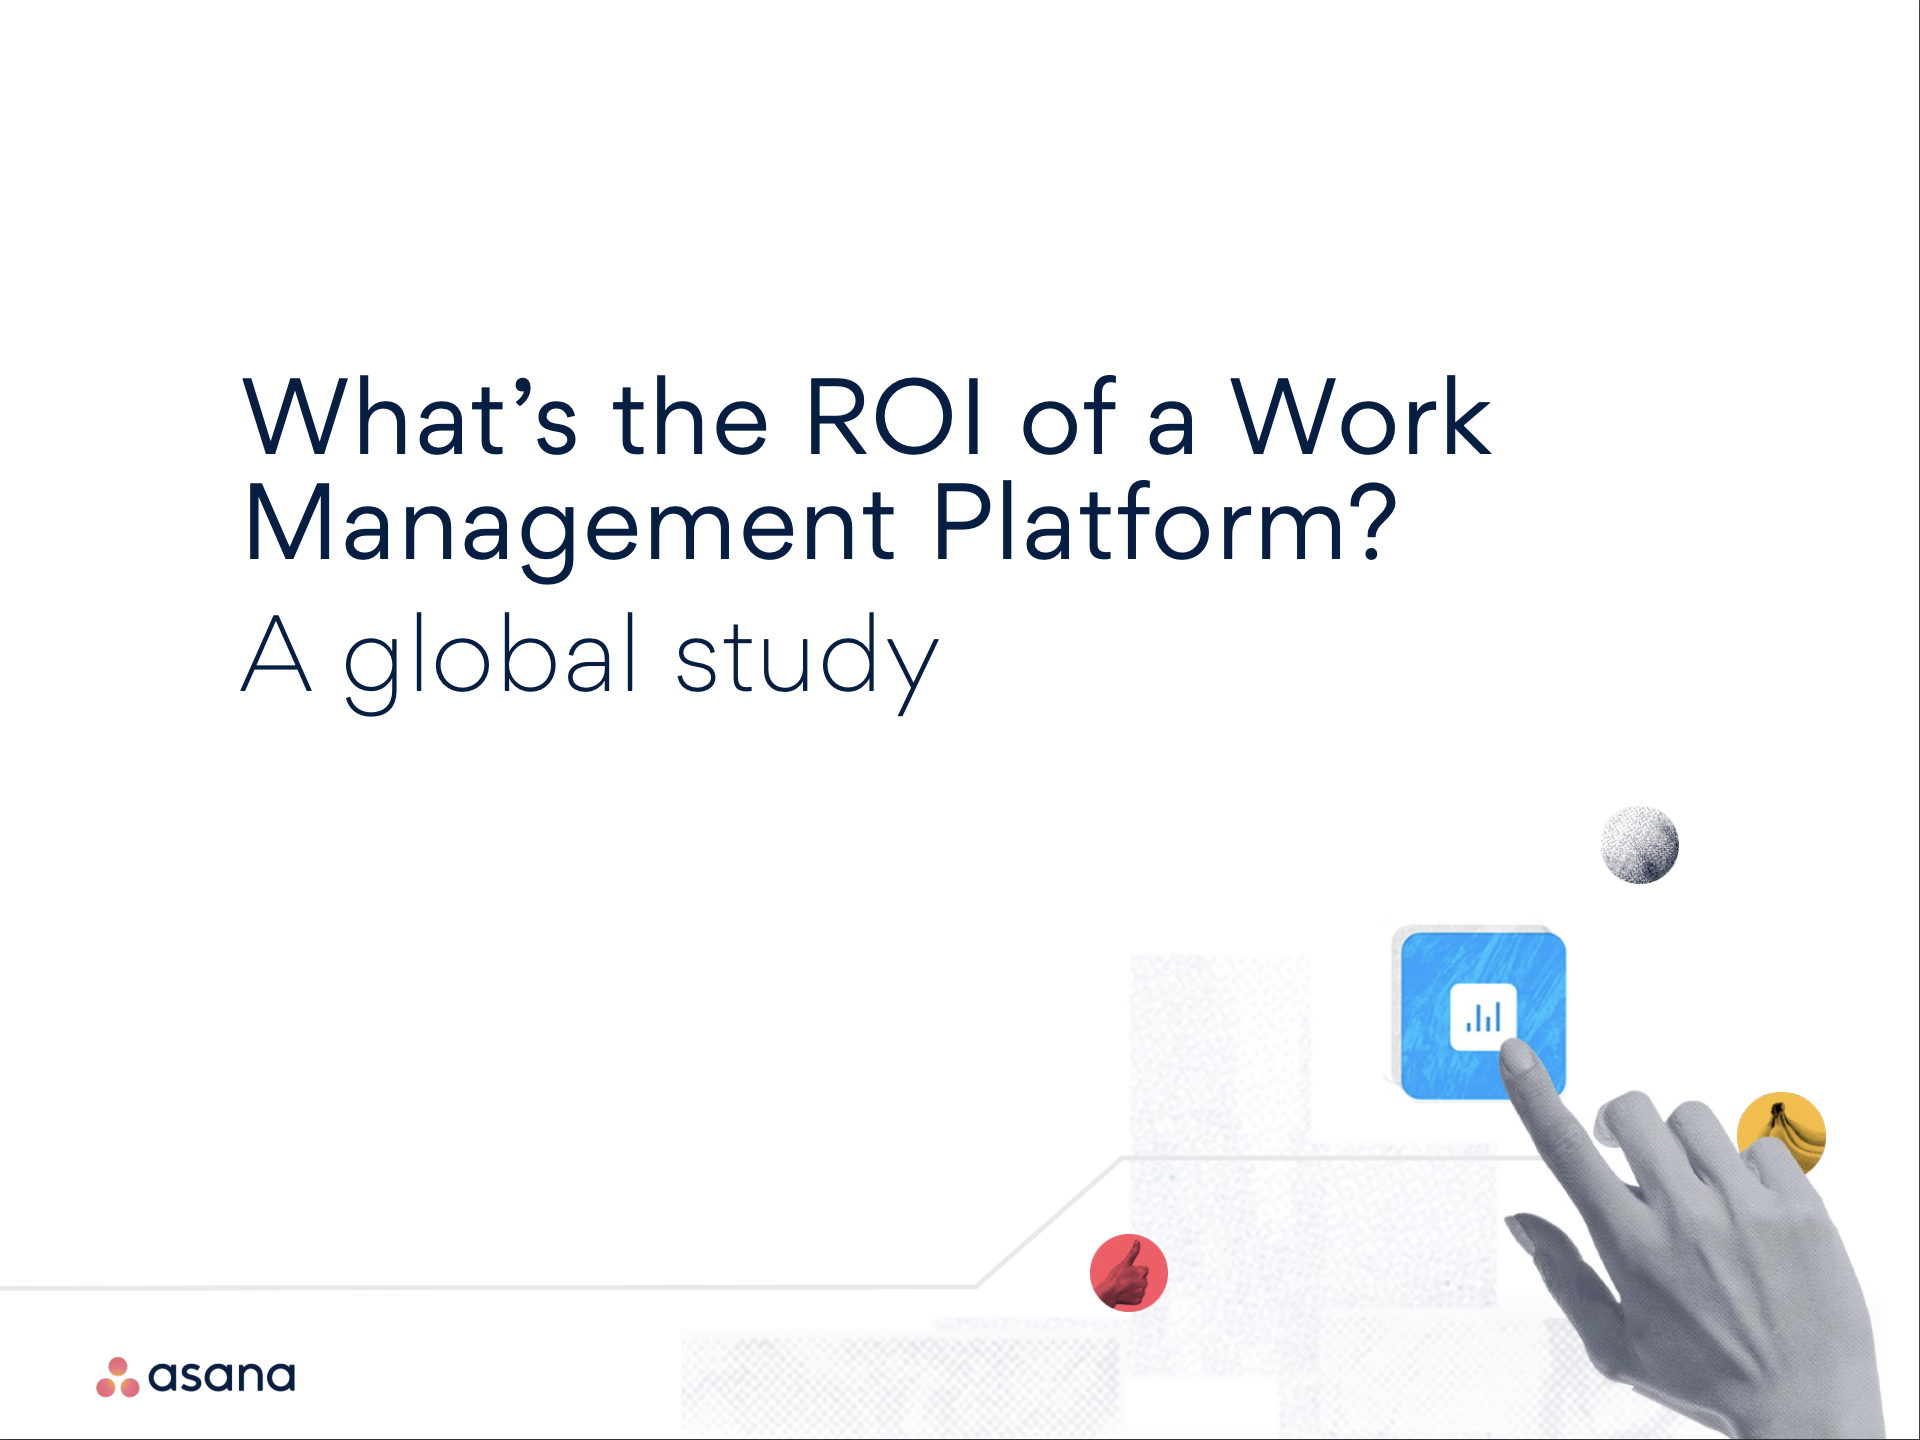 Asana - Whats the ROI of a work management platform - Cover